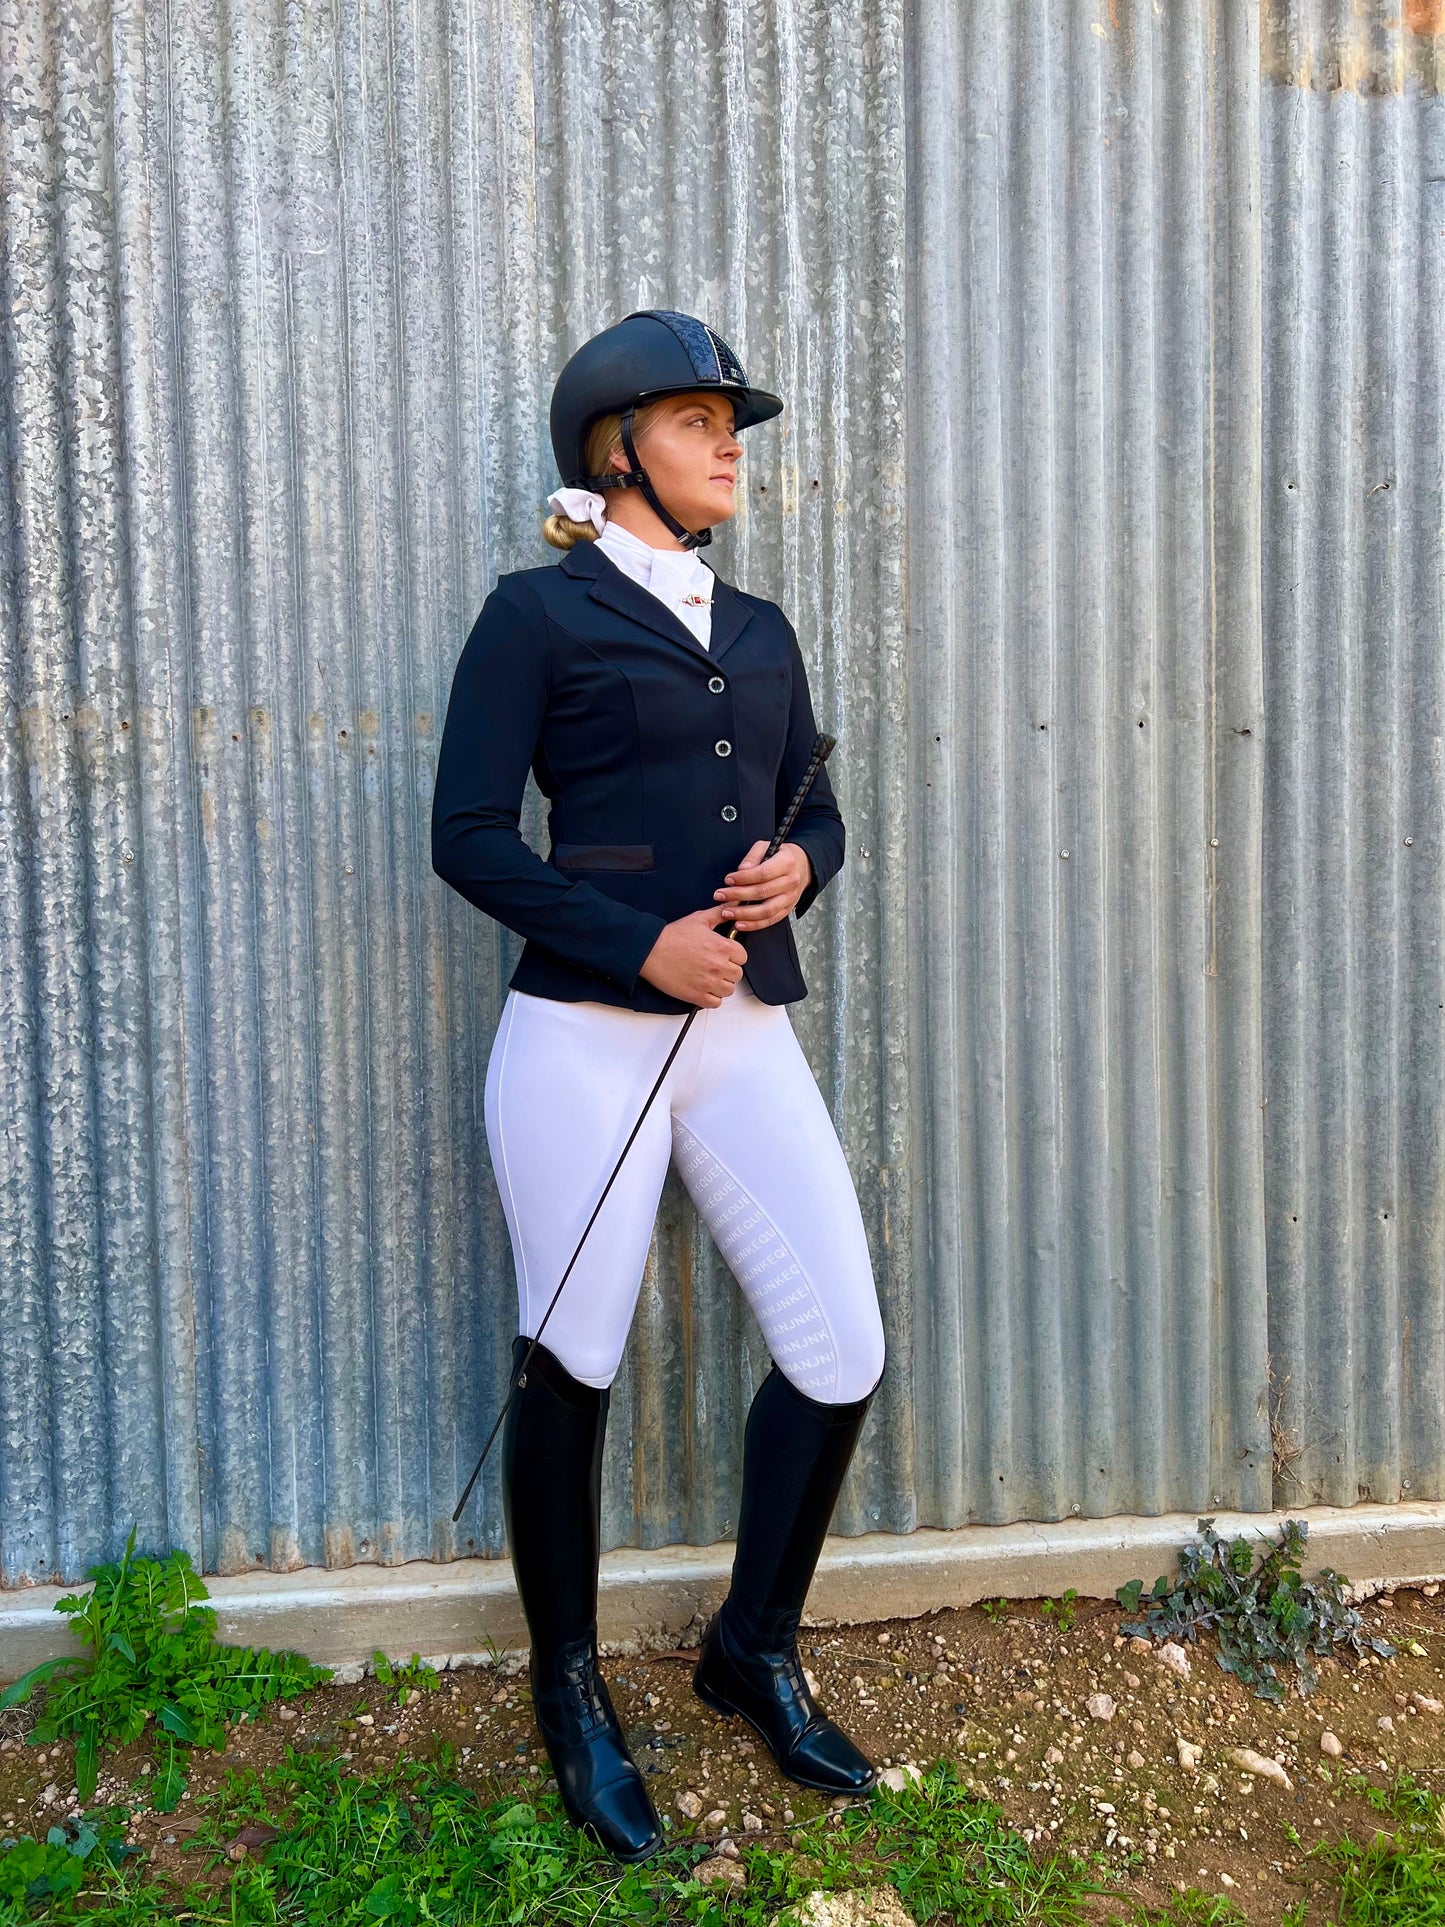 Woman in equestrian attire with horse riding tights and helmet.